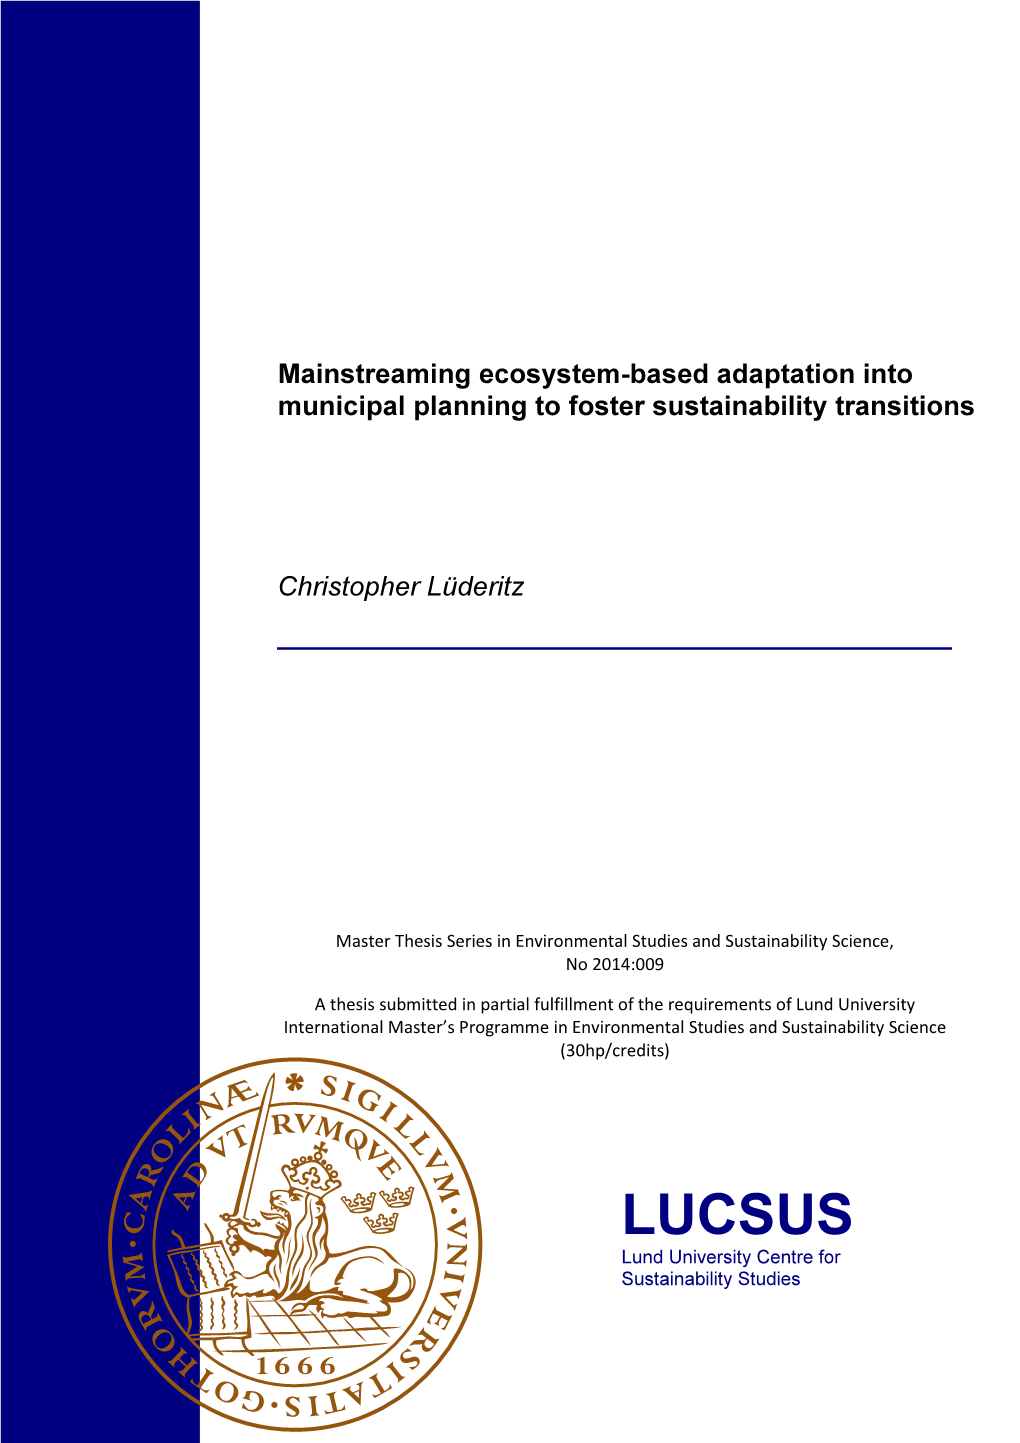 LUCSUS Lund University Centre for Sustainability Studies